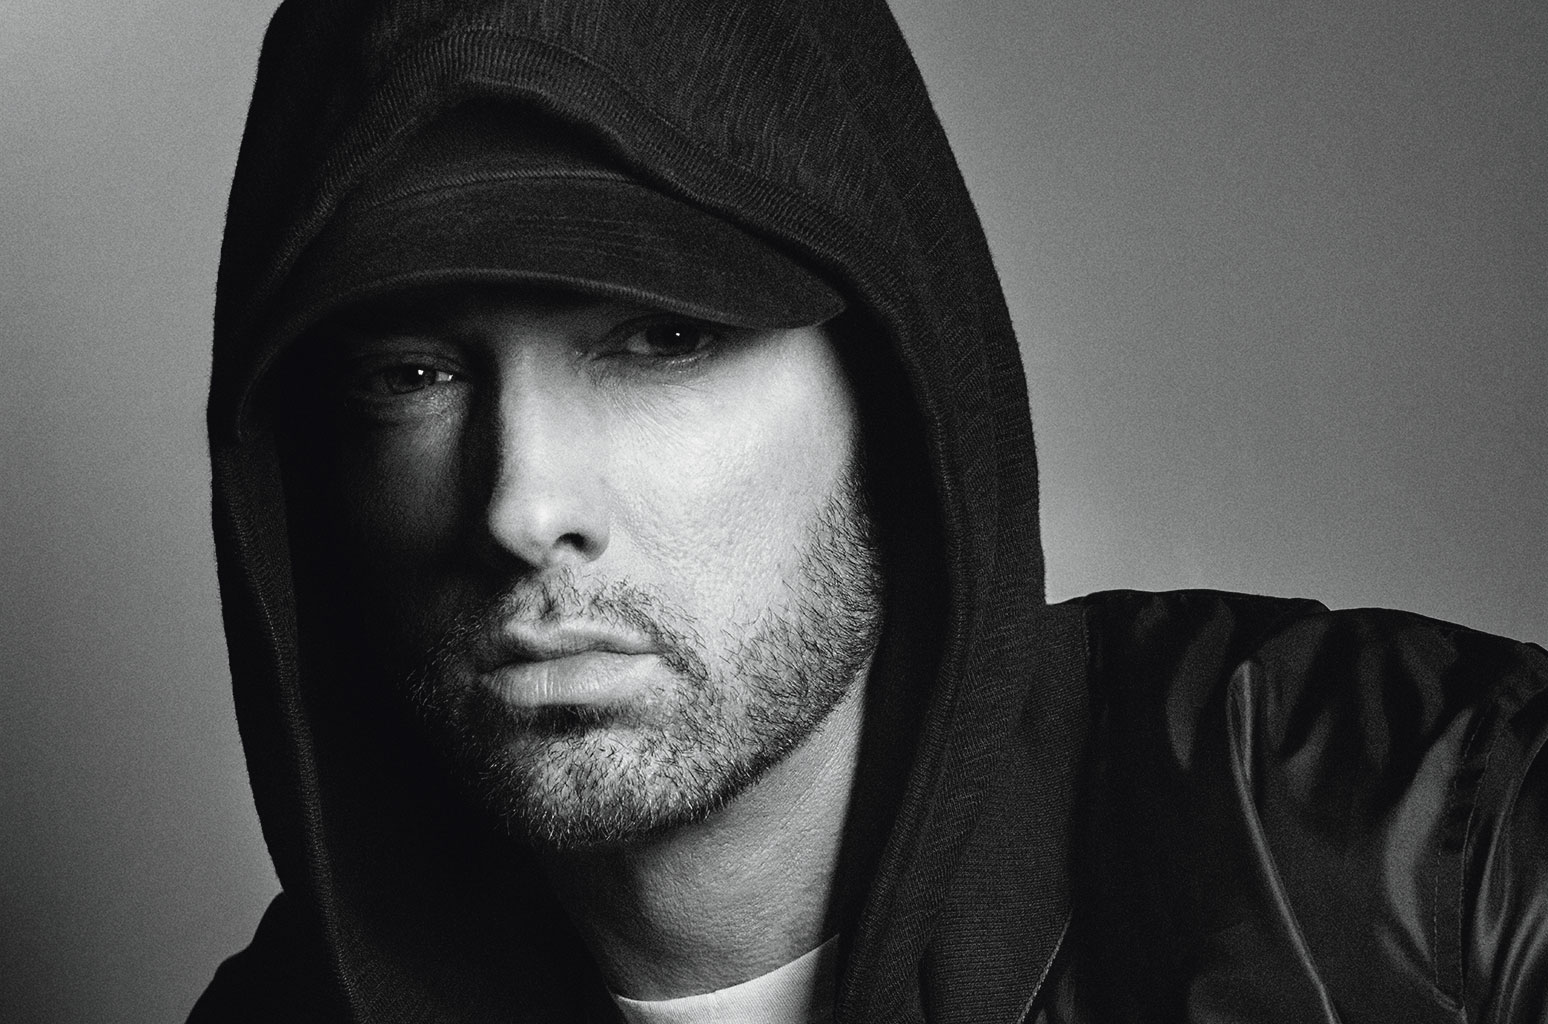 Eminem's 'Music To Be Murdered By' Bound for No. 1 Debut on Billboard 200 Albums Chart